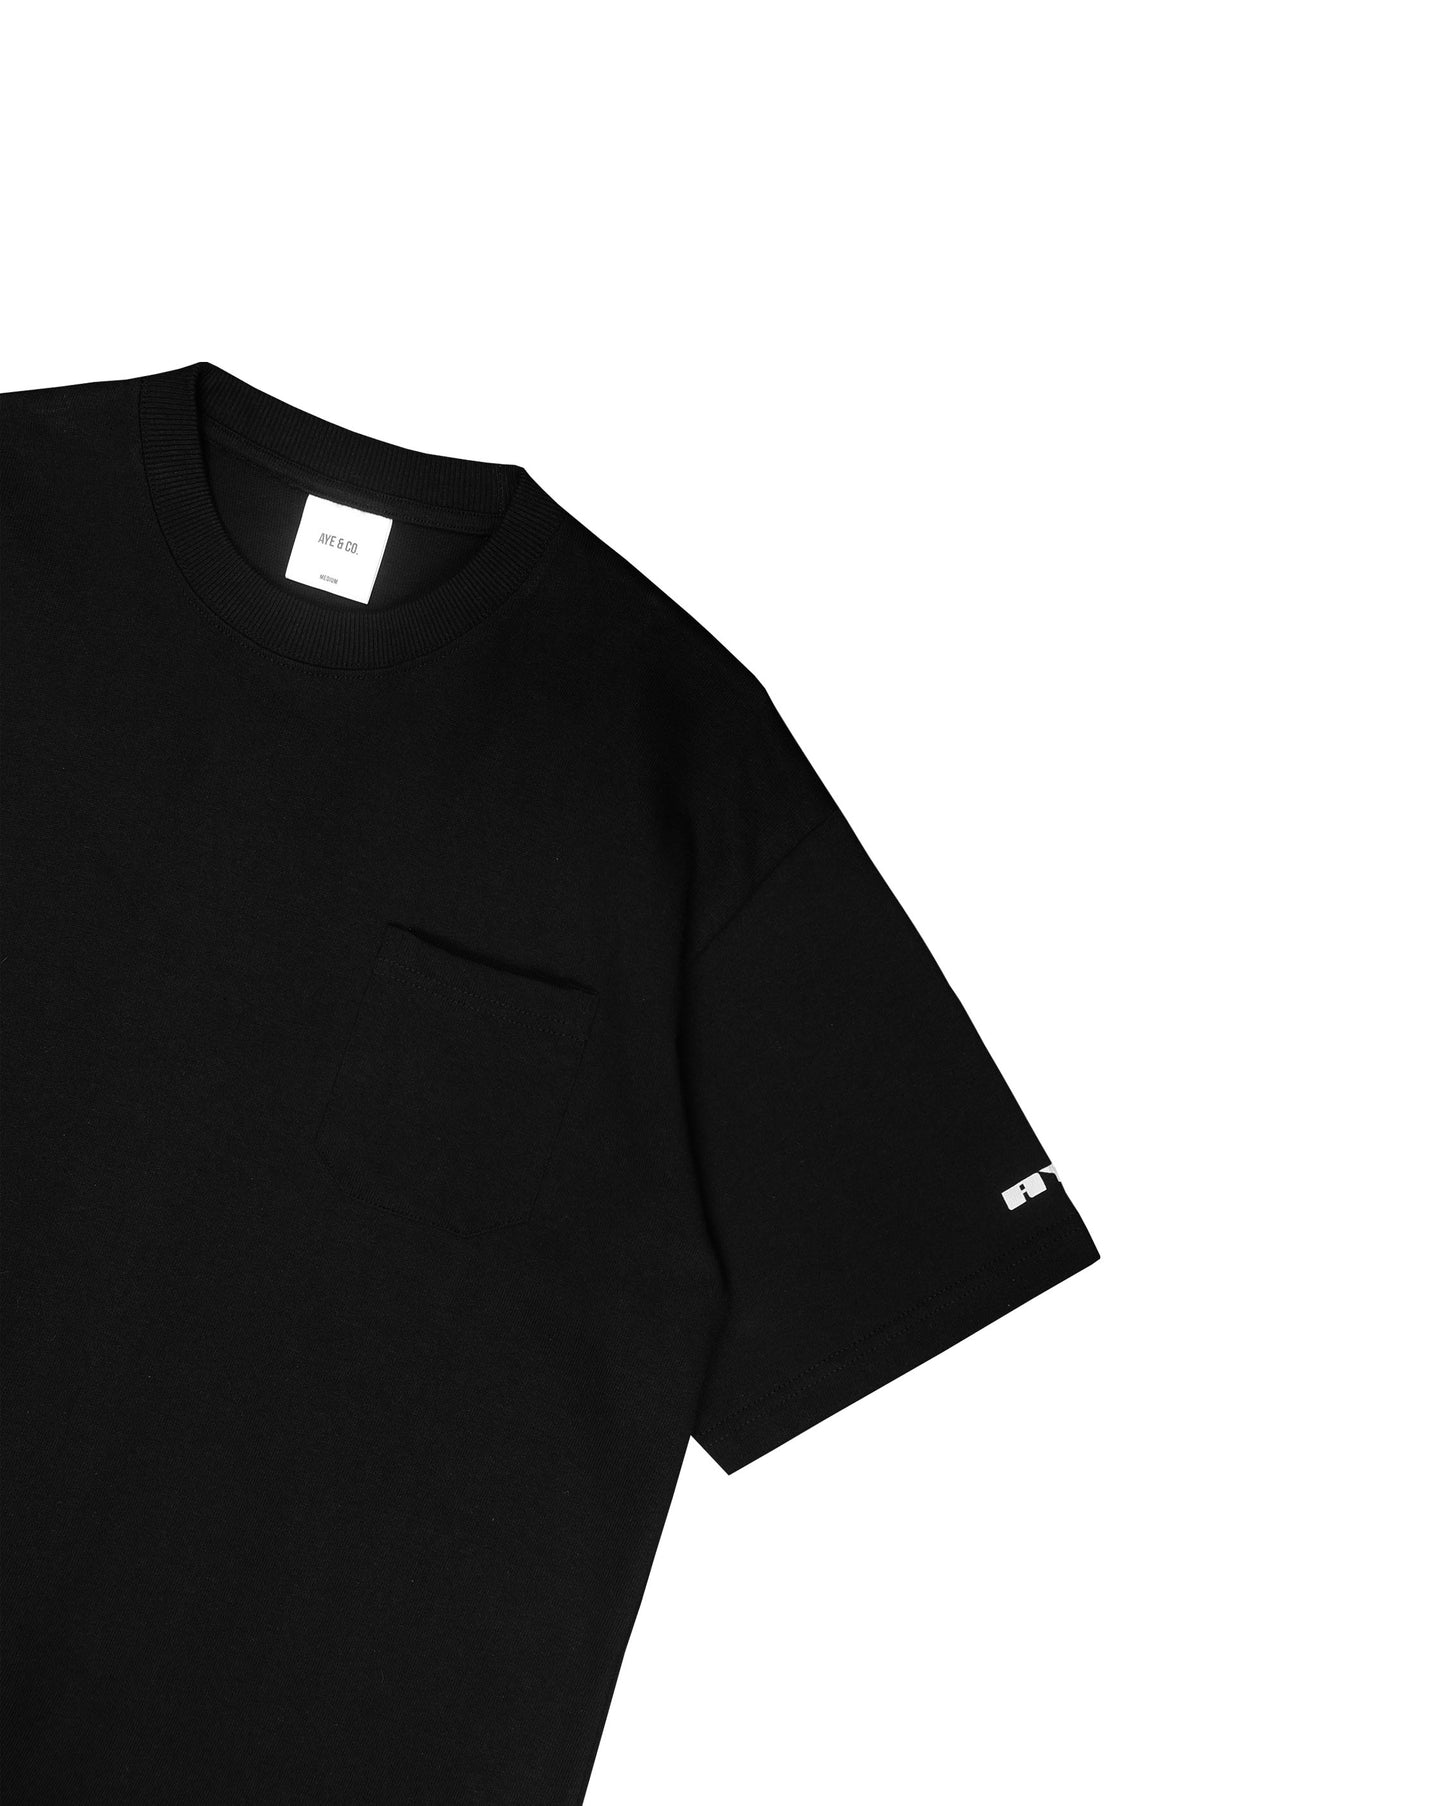 Lustro Black Relaxed Fit Pocket Tees